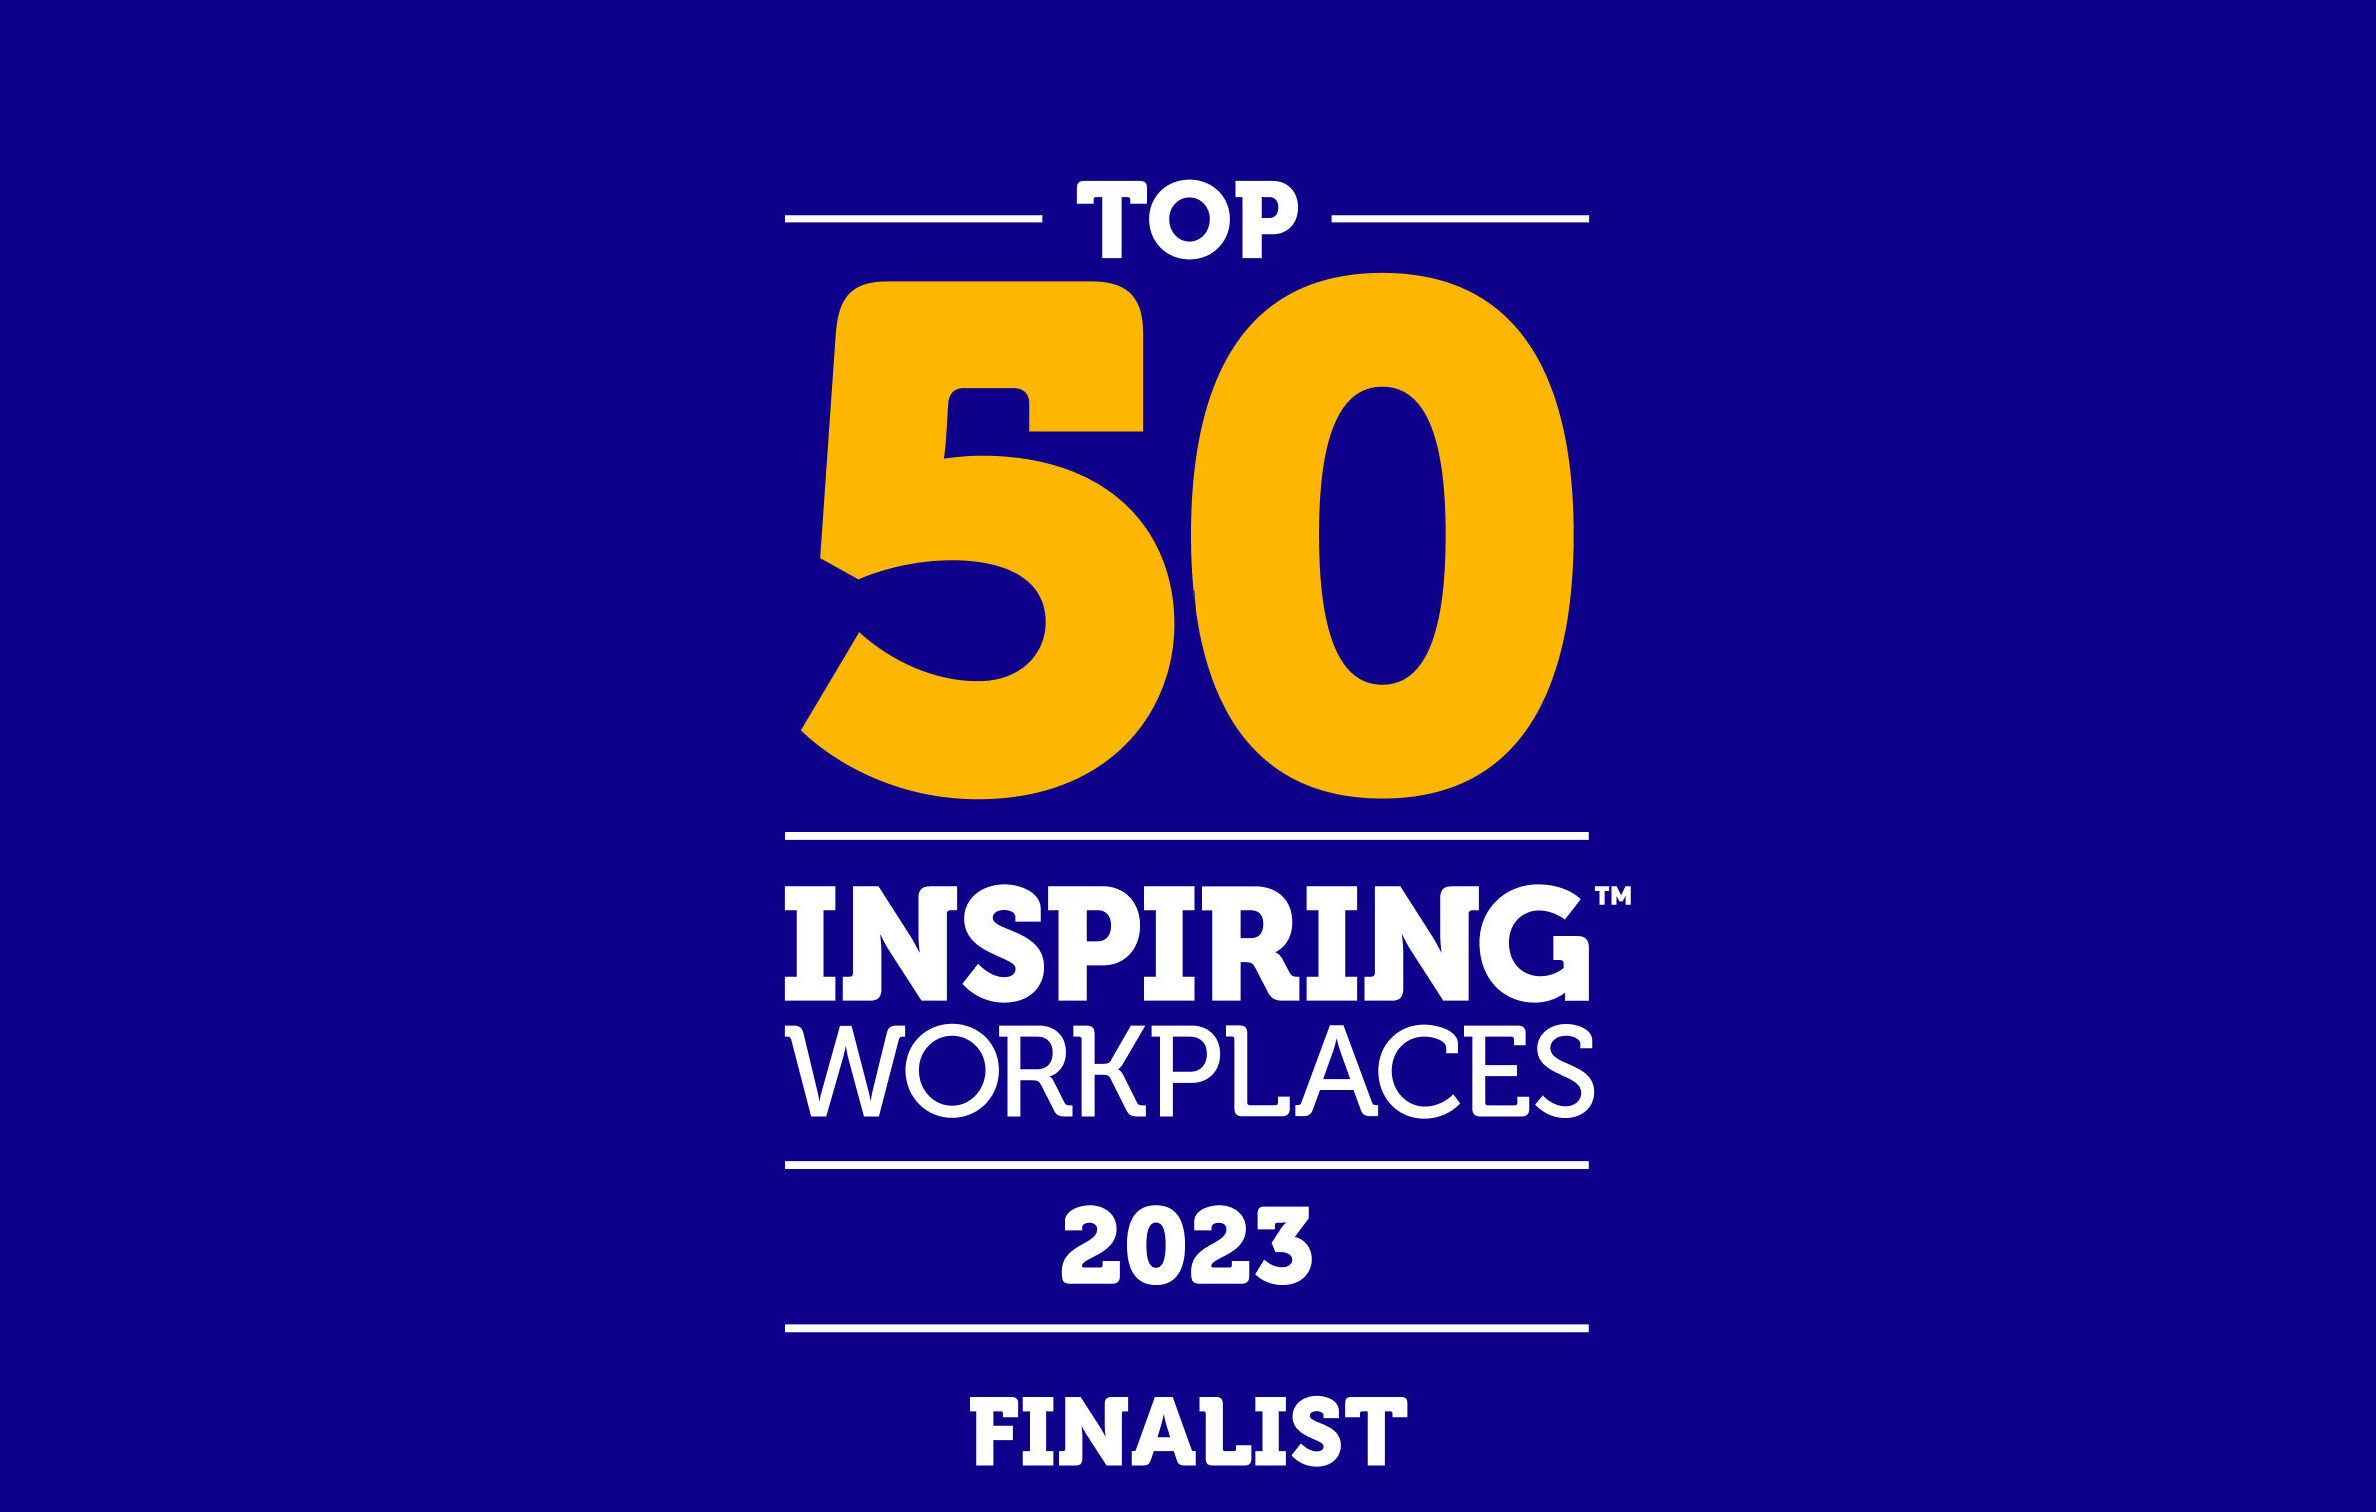 2023 Inspiring Workplaces Awards finalists for North America announced